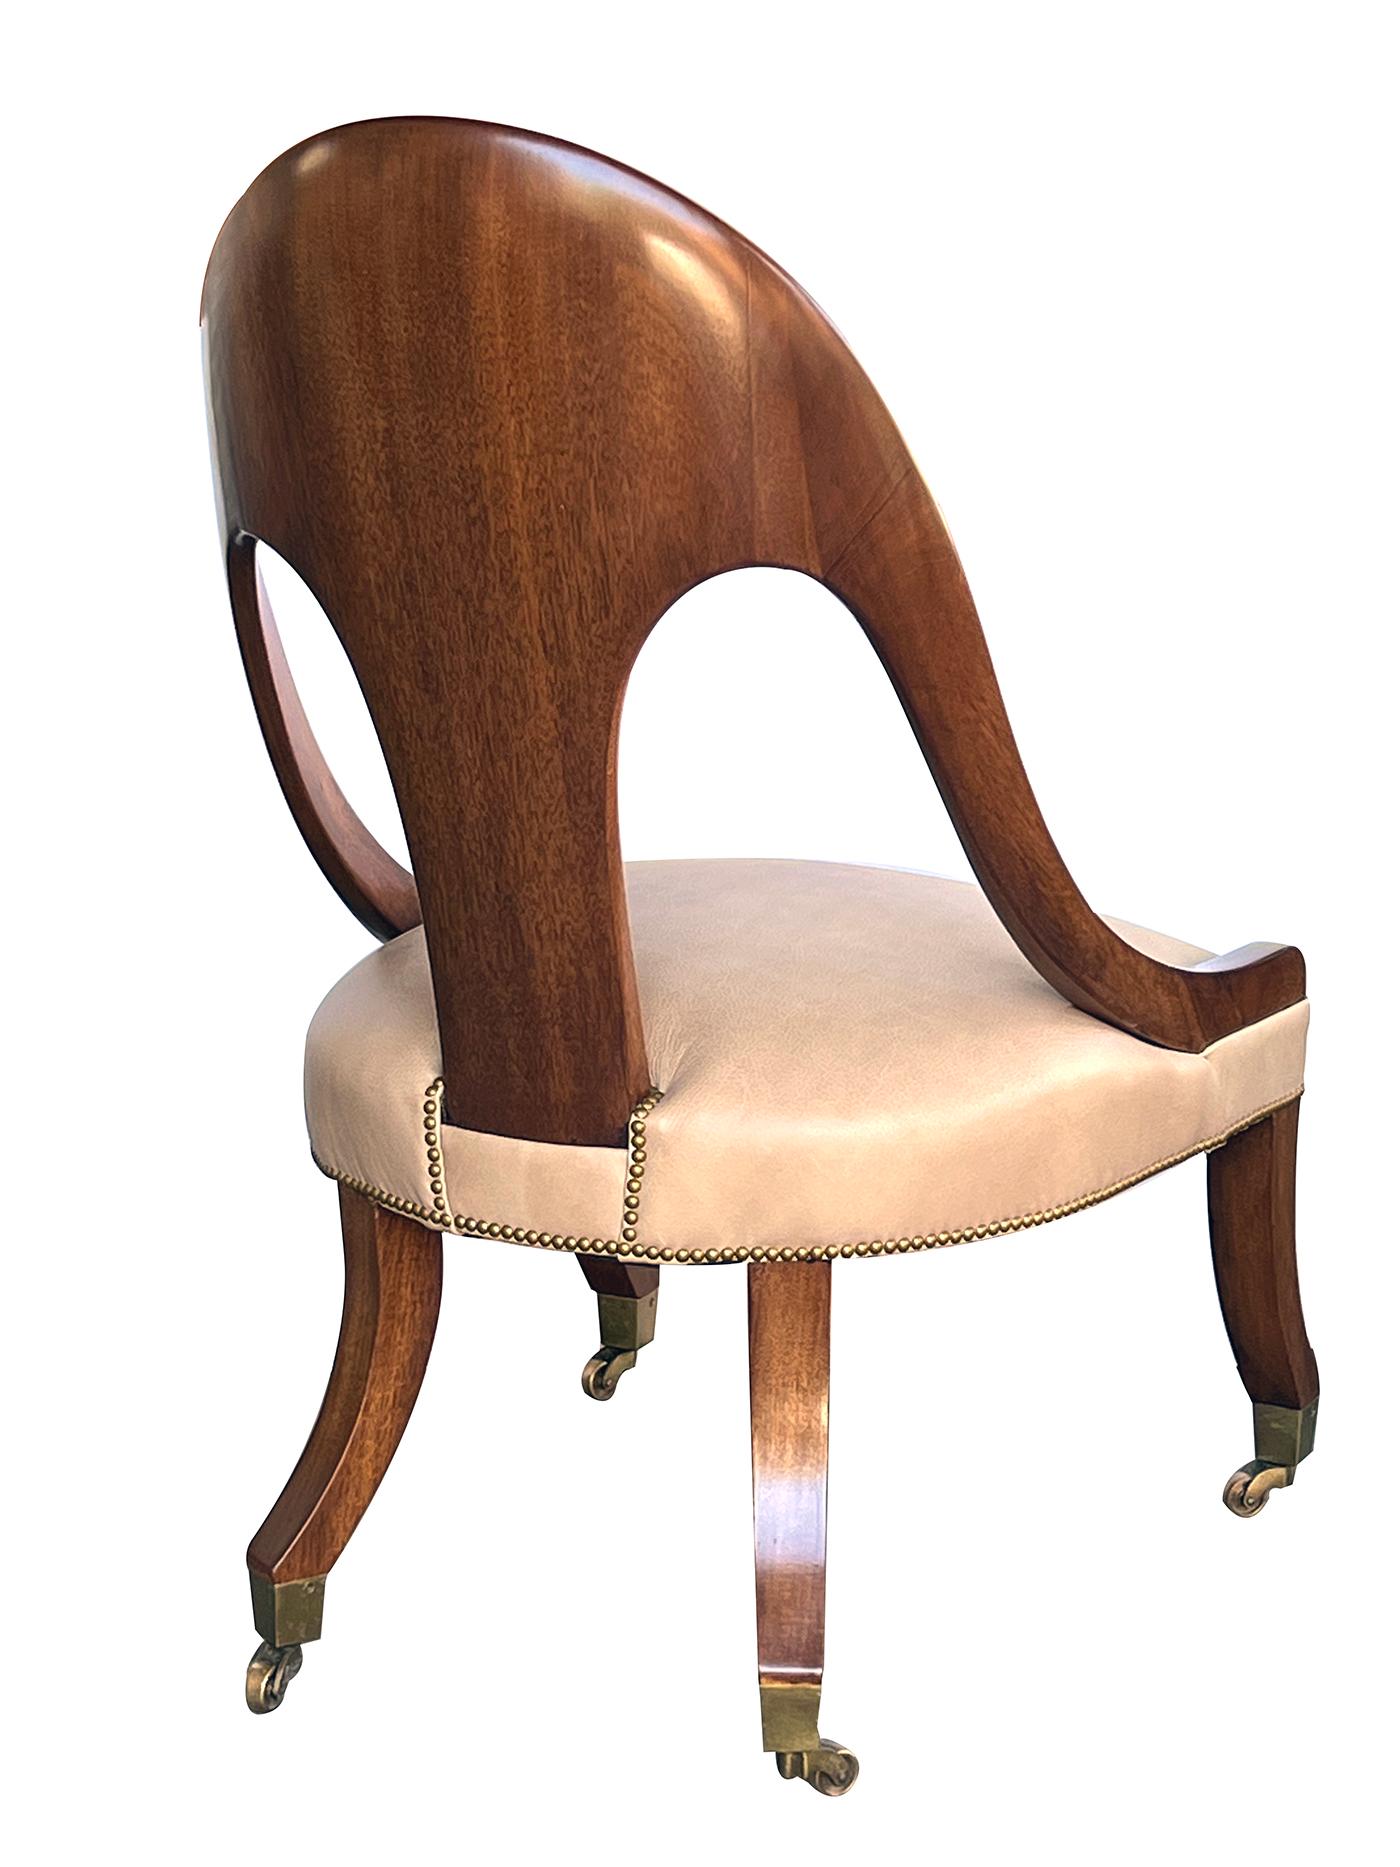 Mid-20th Century Shapely English Regency Style Solid Mahogany Spoonback Chair For Sale